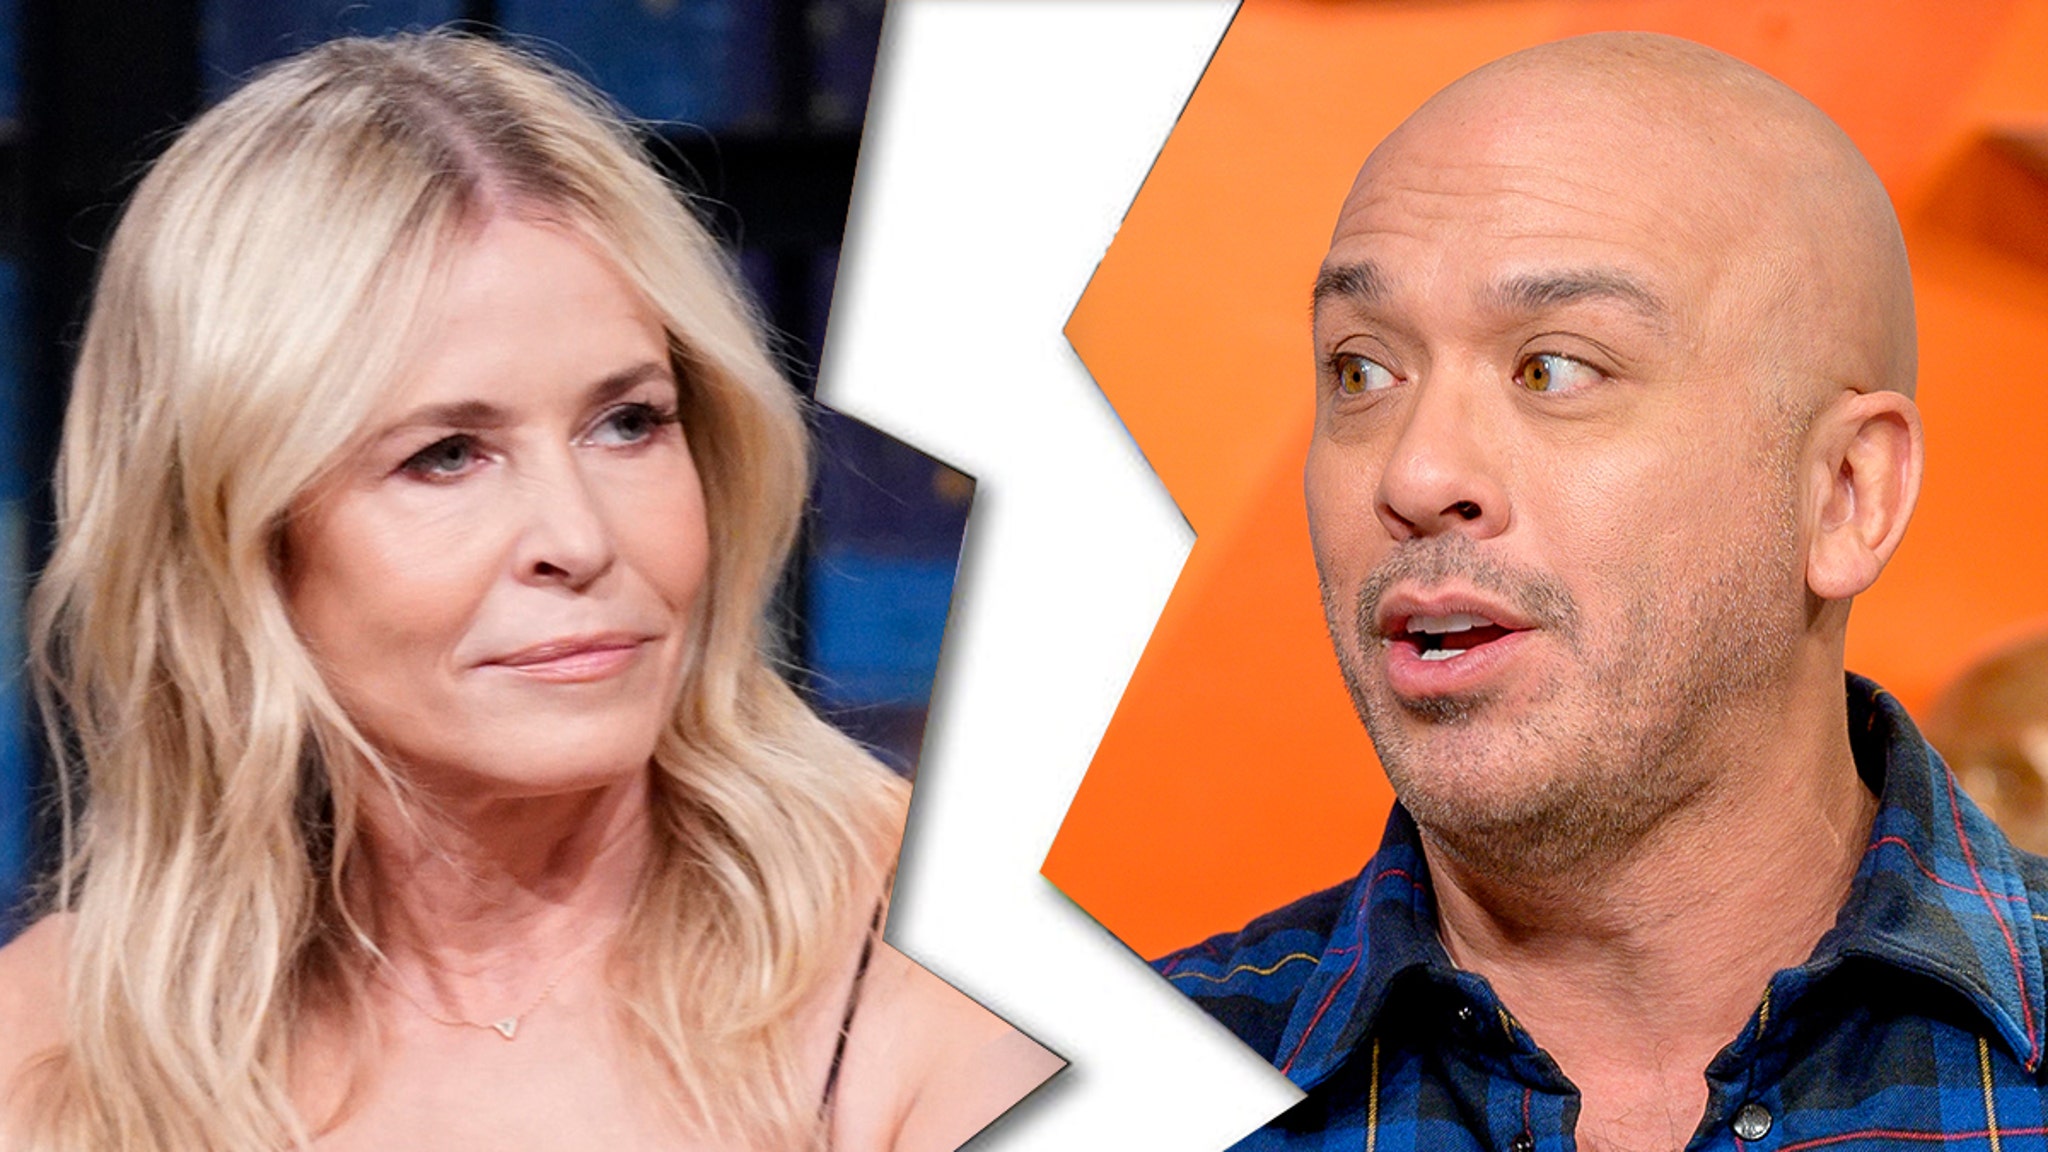 Chelsea Handler and Jo Koy Split After One Year of Dating – TMZ